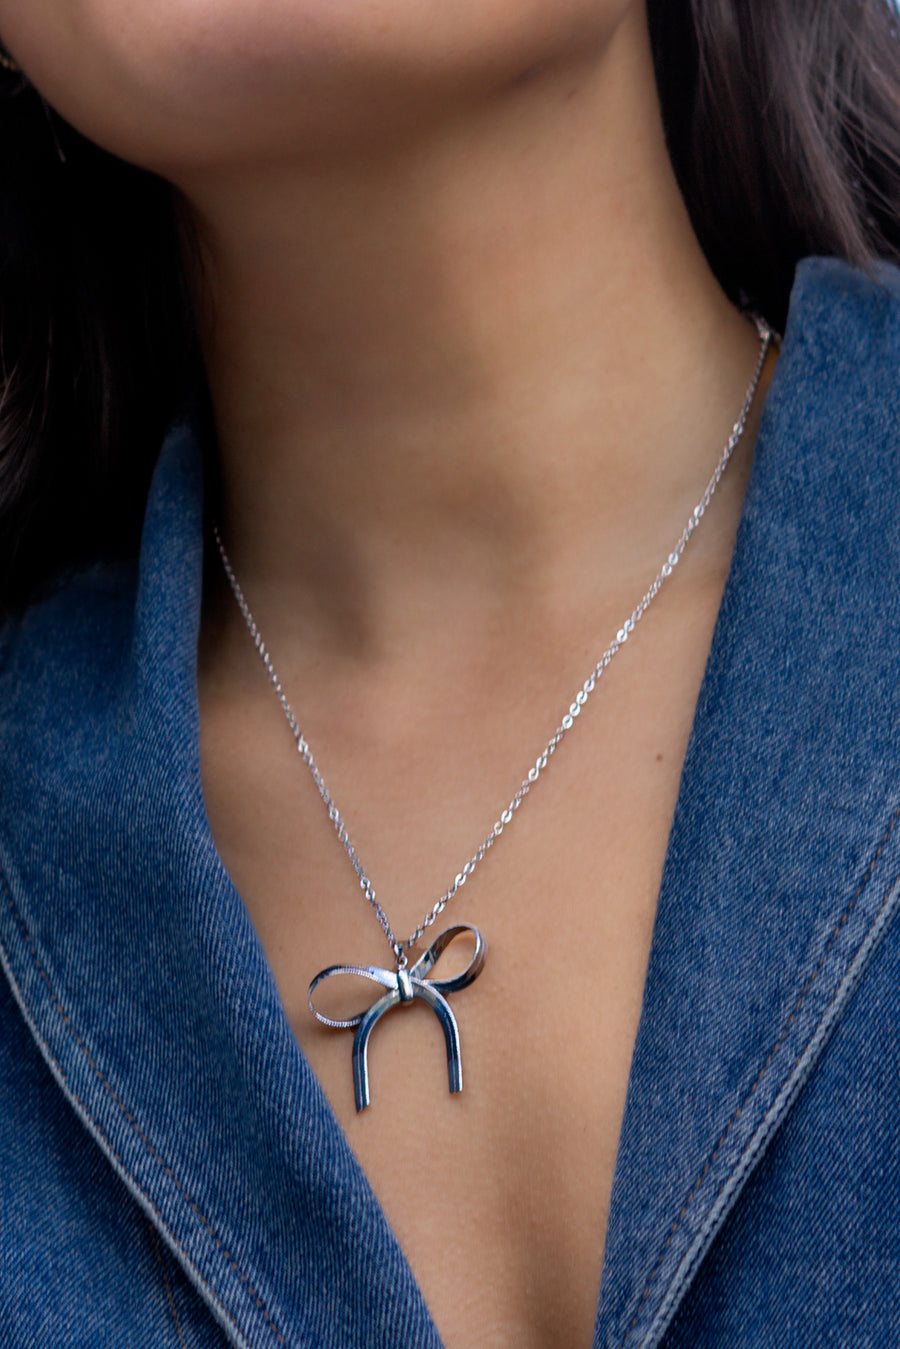 The Bow is Mine Necklace in Silver